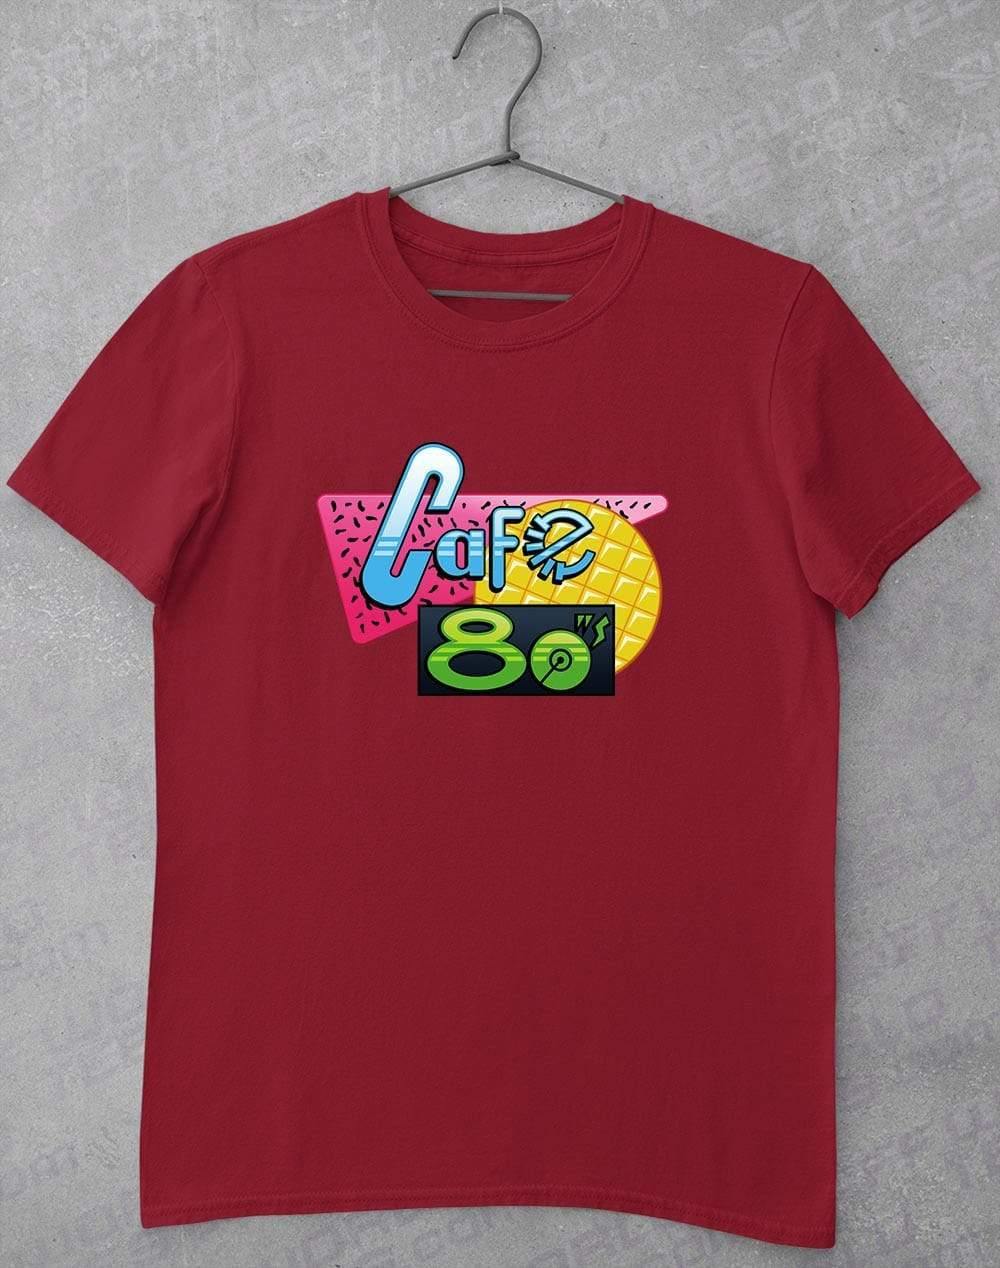 Cafe 80's T-Shirt S / Cardinal Red  - Off World Tees